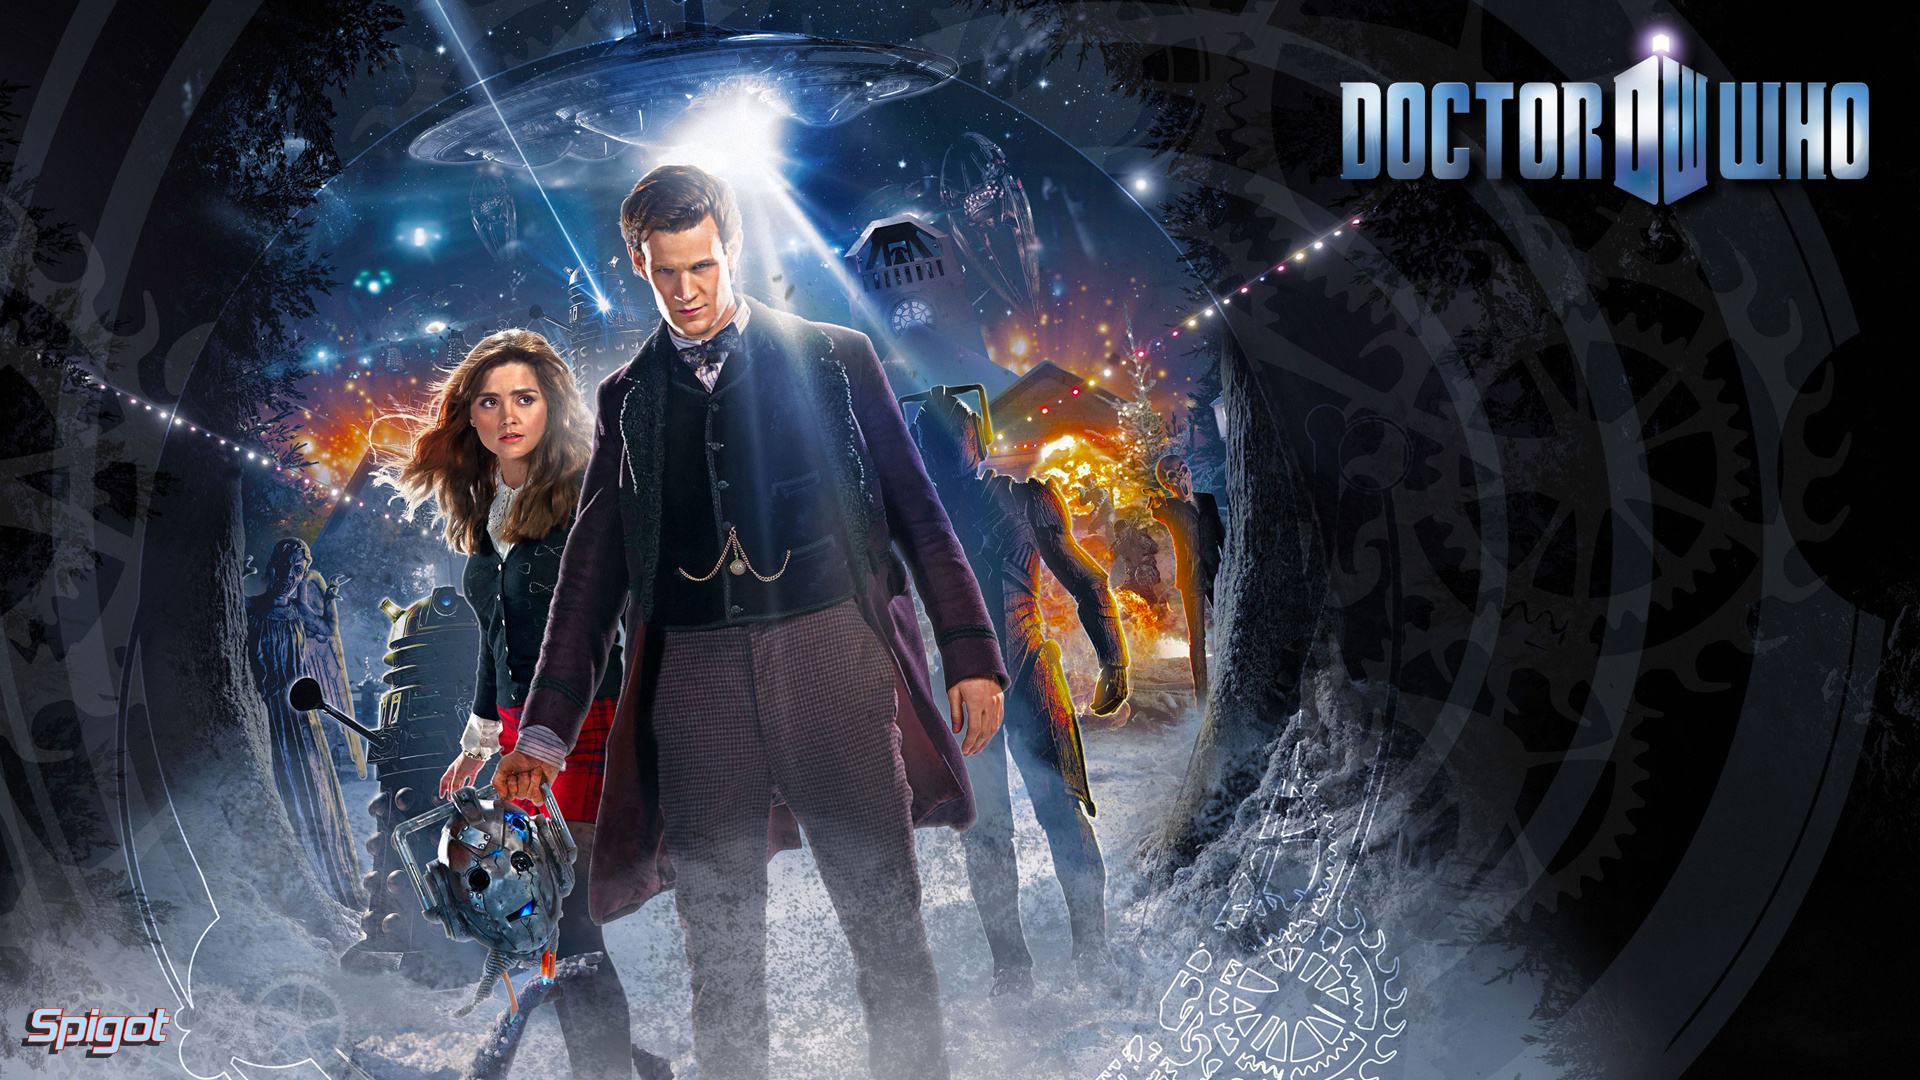 Doctor Who Christmas special, Festive episode, George Spigot's blog, Special edition, 1920x1080 Full HD Desktop